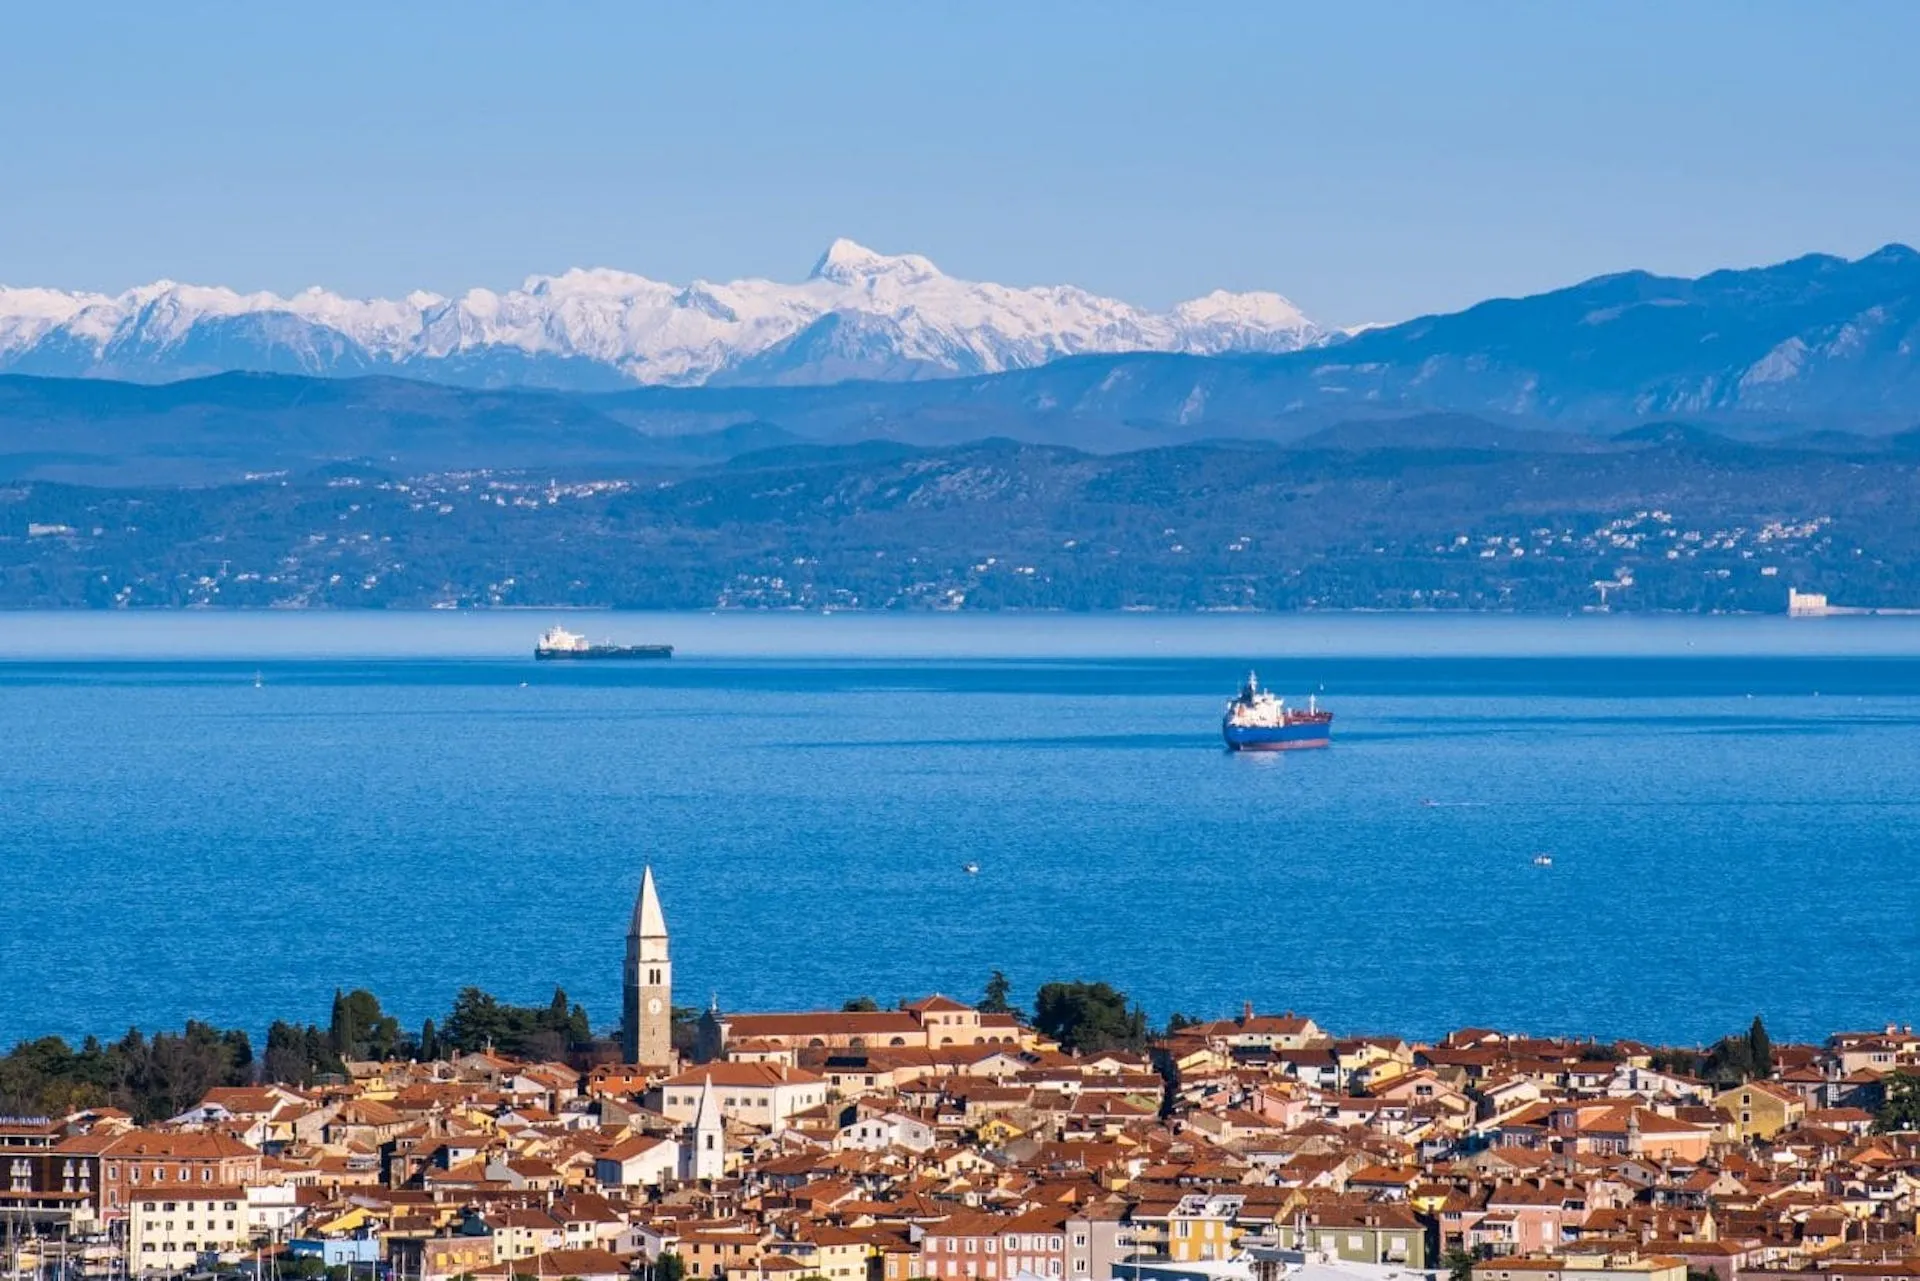 Izola with mountains in the background